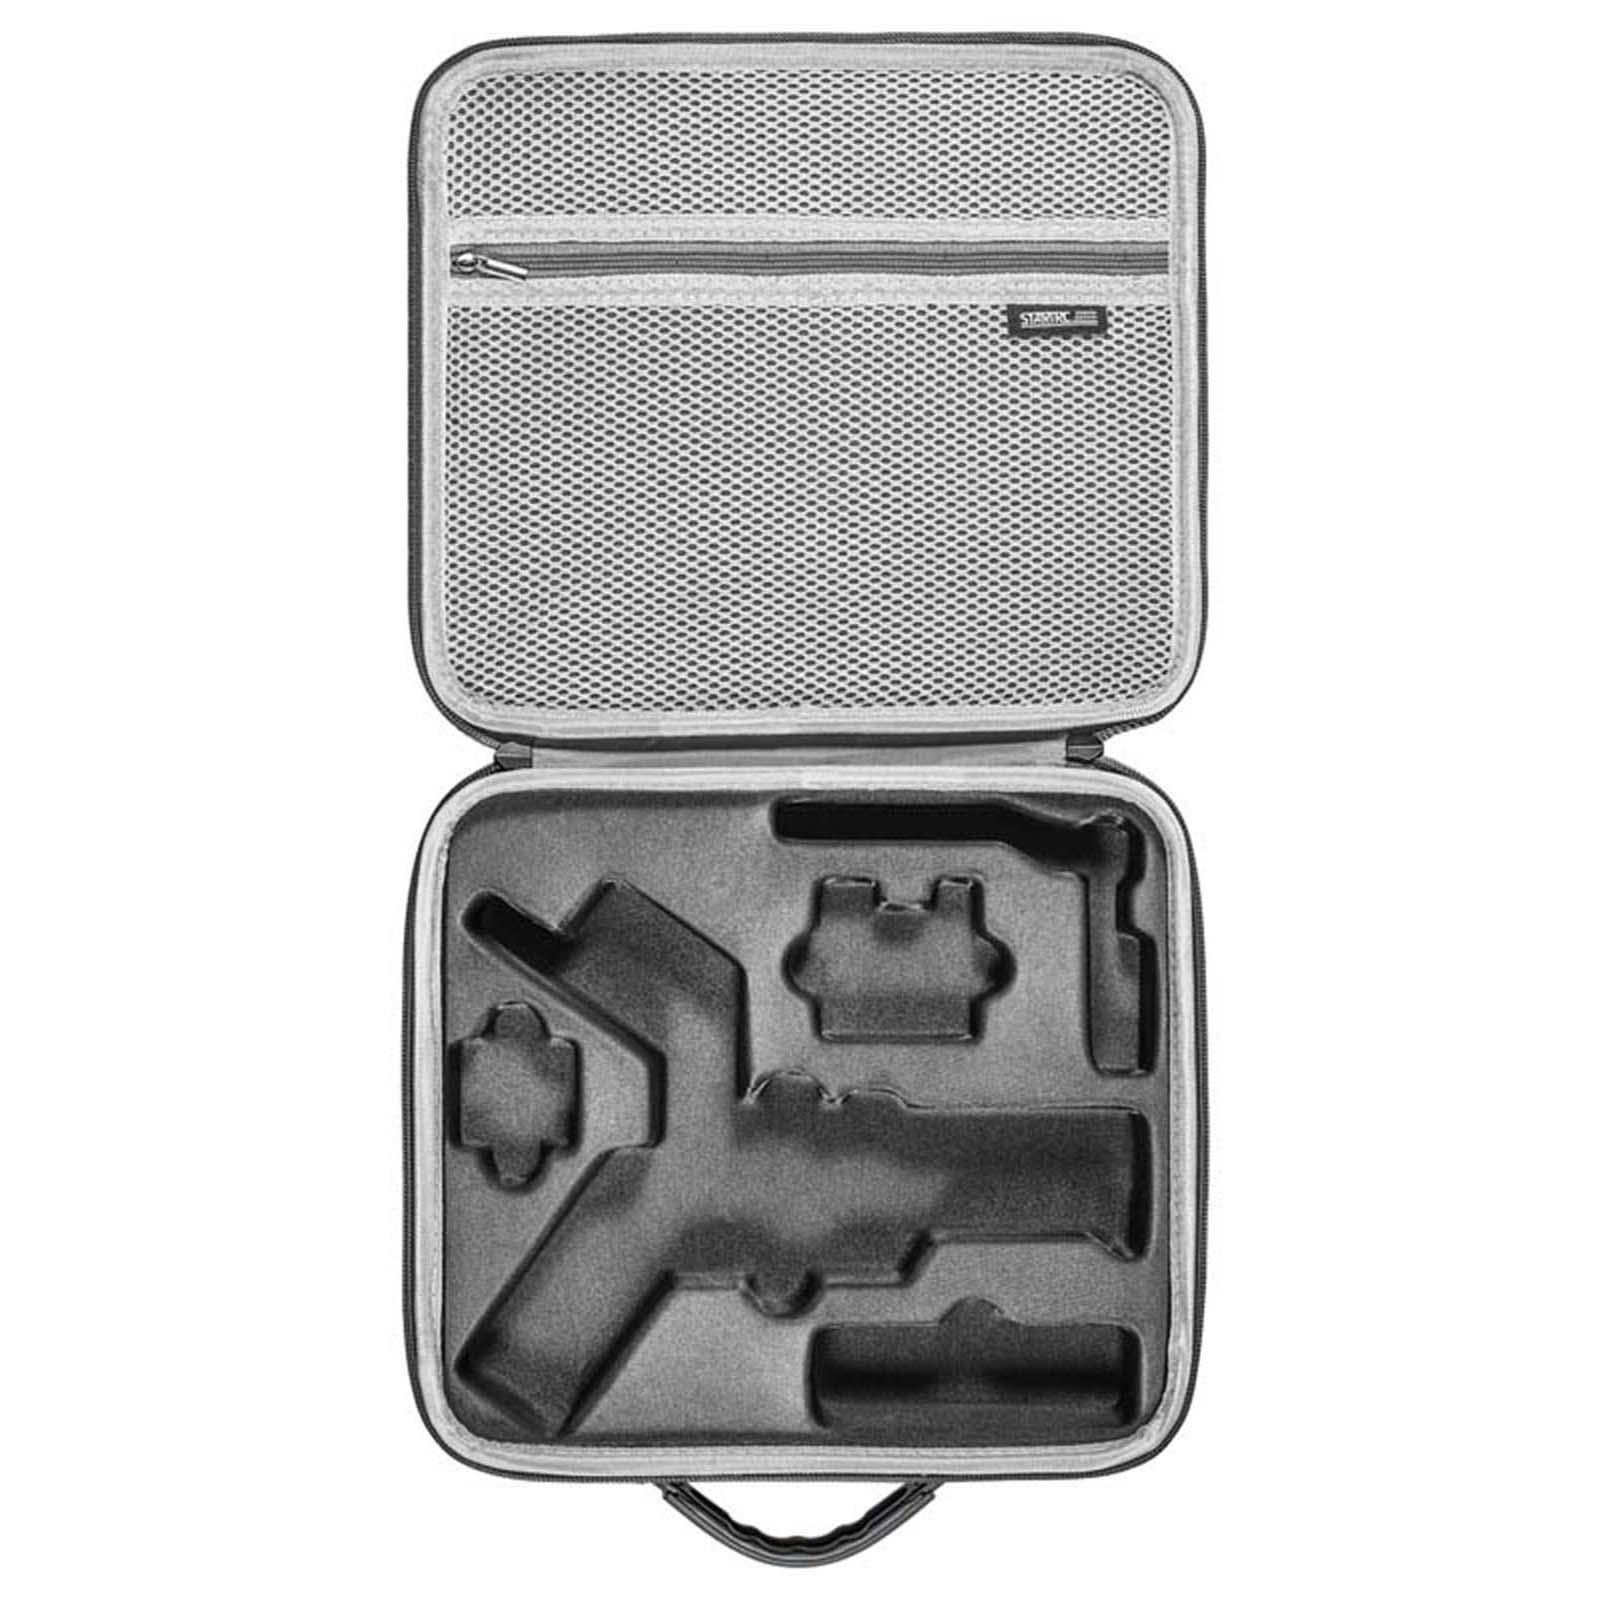 Carrying Case Camera Stabilizer Storage Bag Large Capacity for Mini